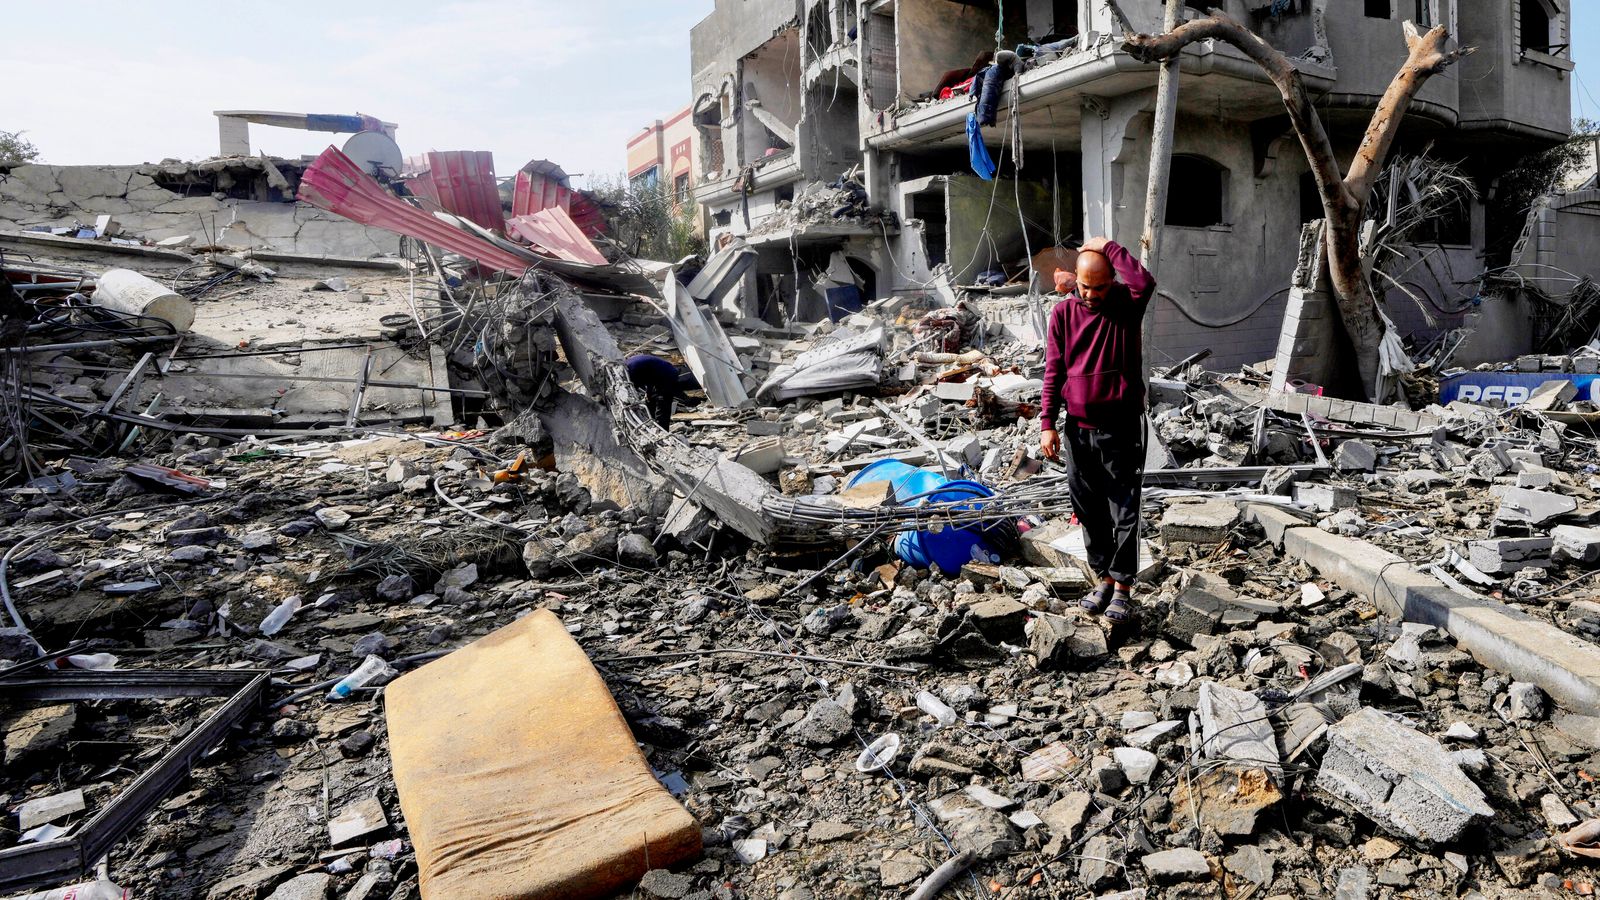 Israel admits airstrike that killed 86 people at Gaza refugee camp was 'regrettable mistake'